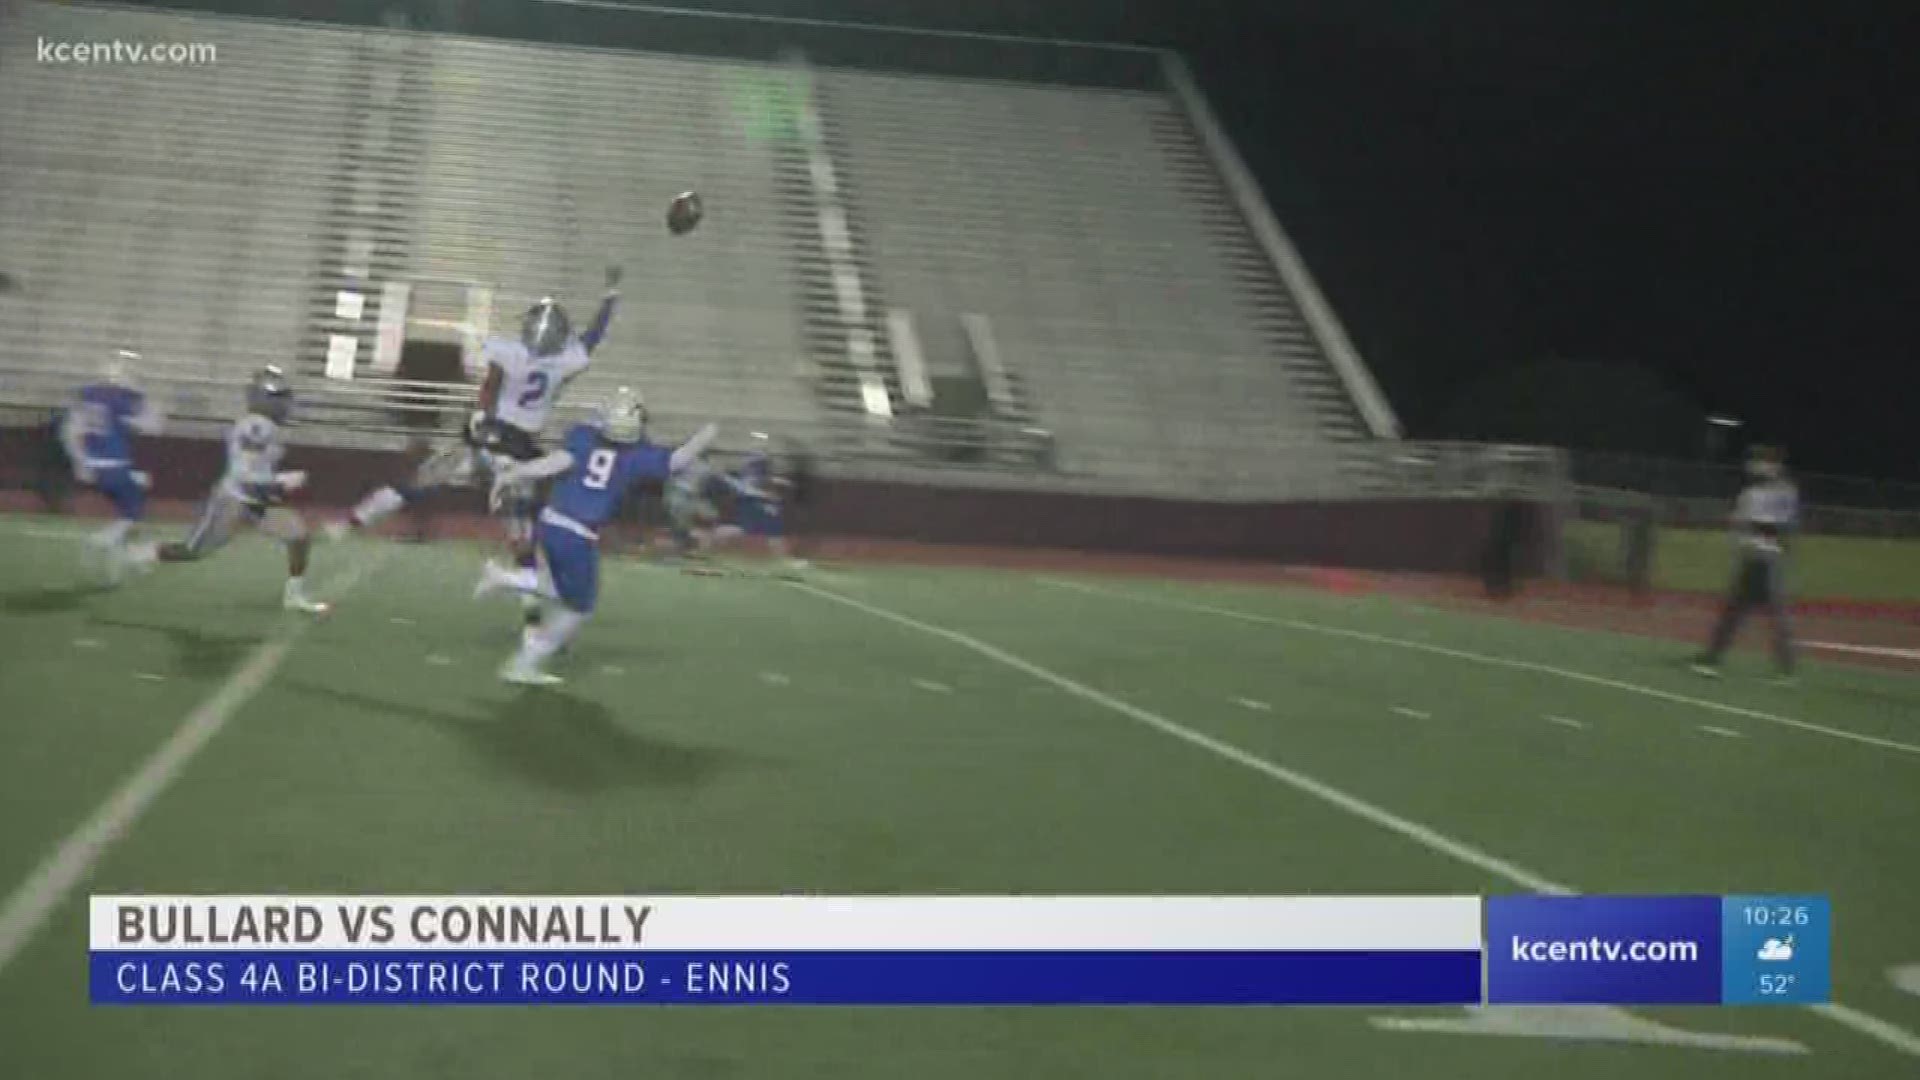 Connally advances to the next round after a high scoring affair against Bullard. The Cadets got the win, 58-31.